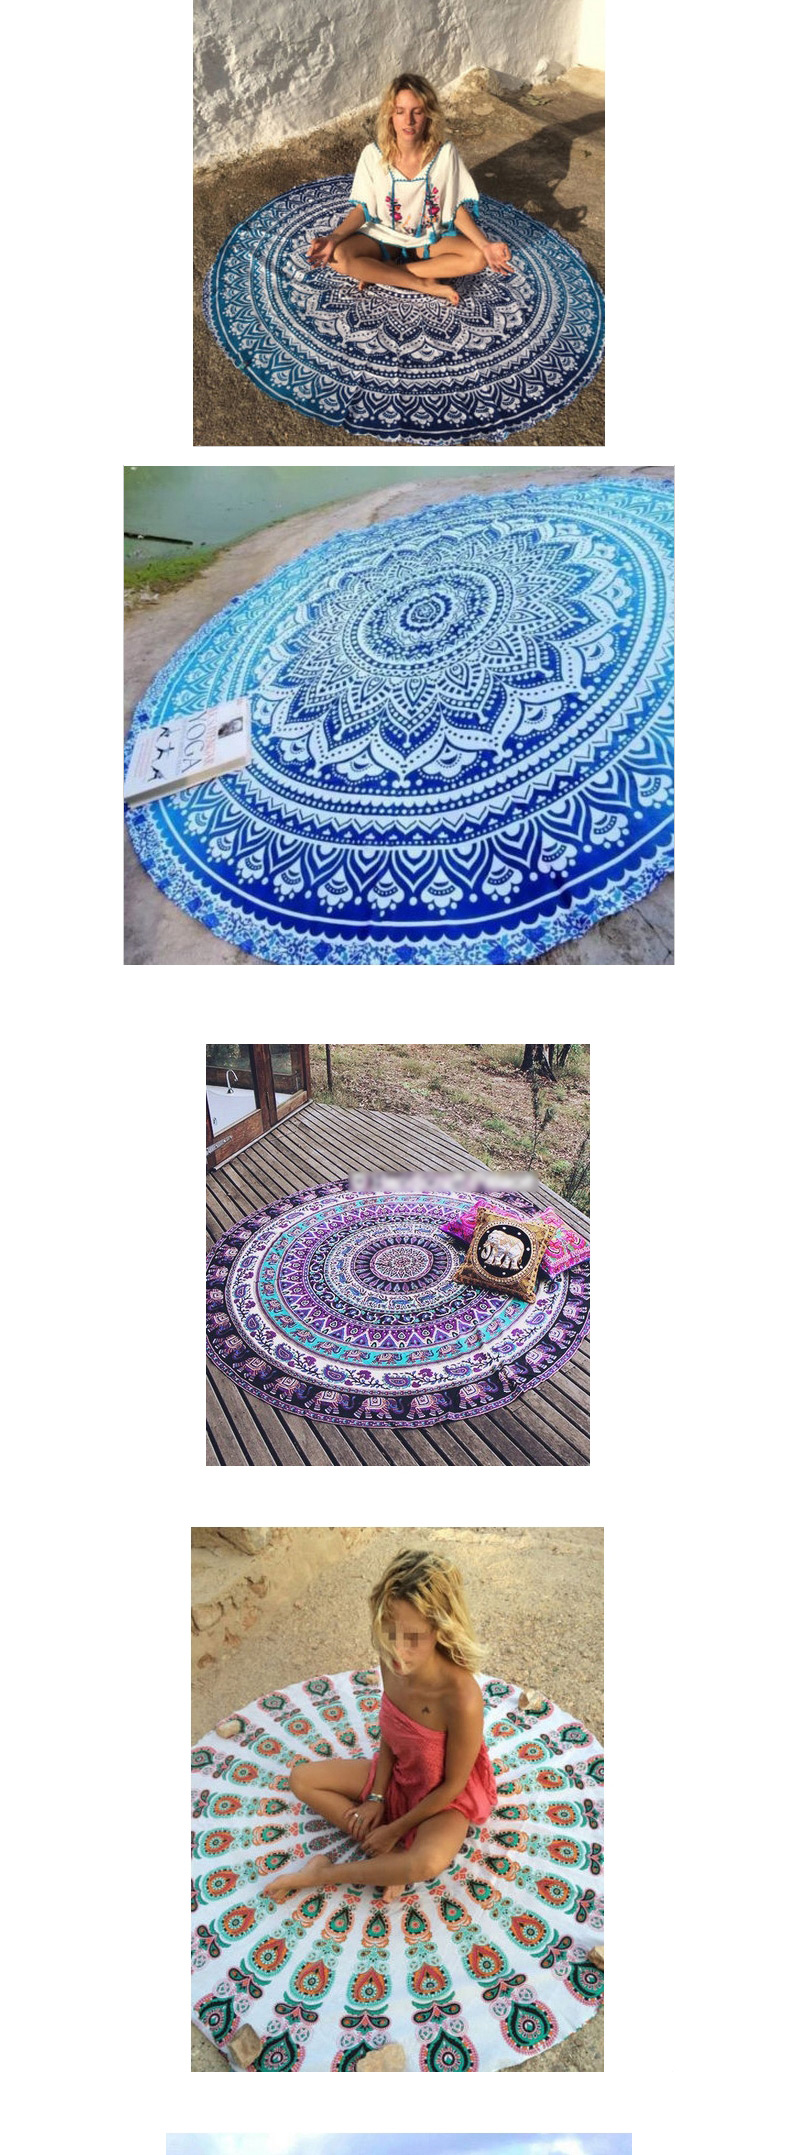 Fashion Purple Peacock Flower Pattern Decorated Round Shape Shawl,Cover-Ups